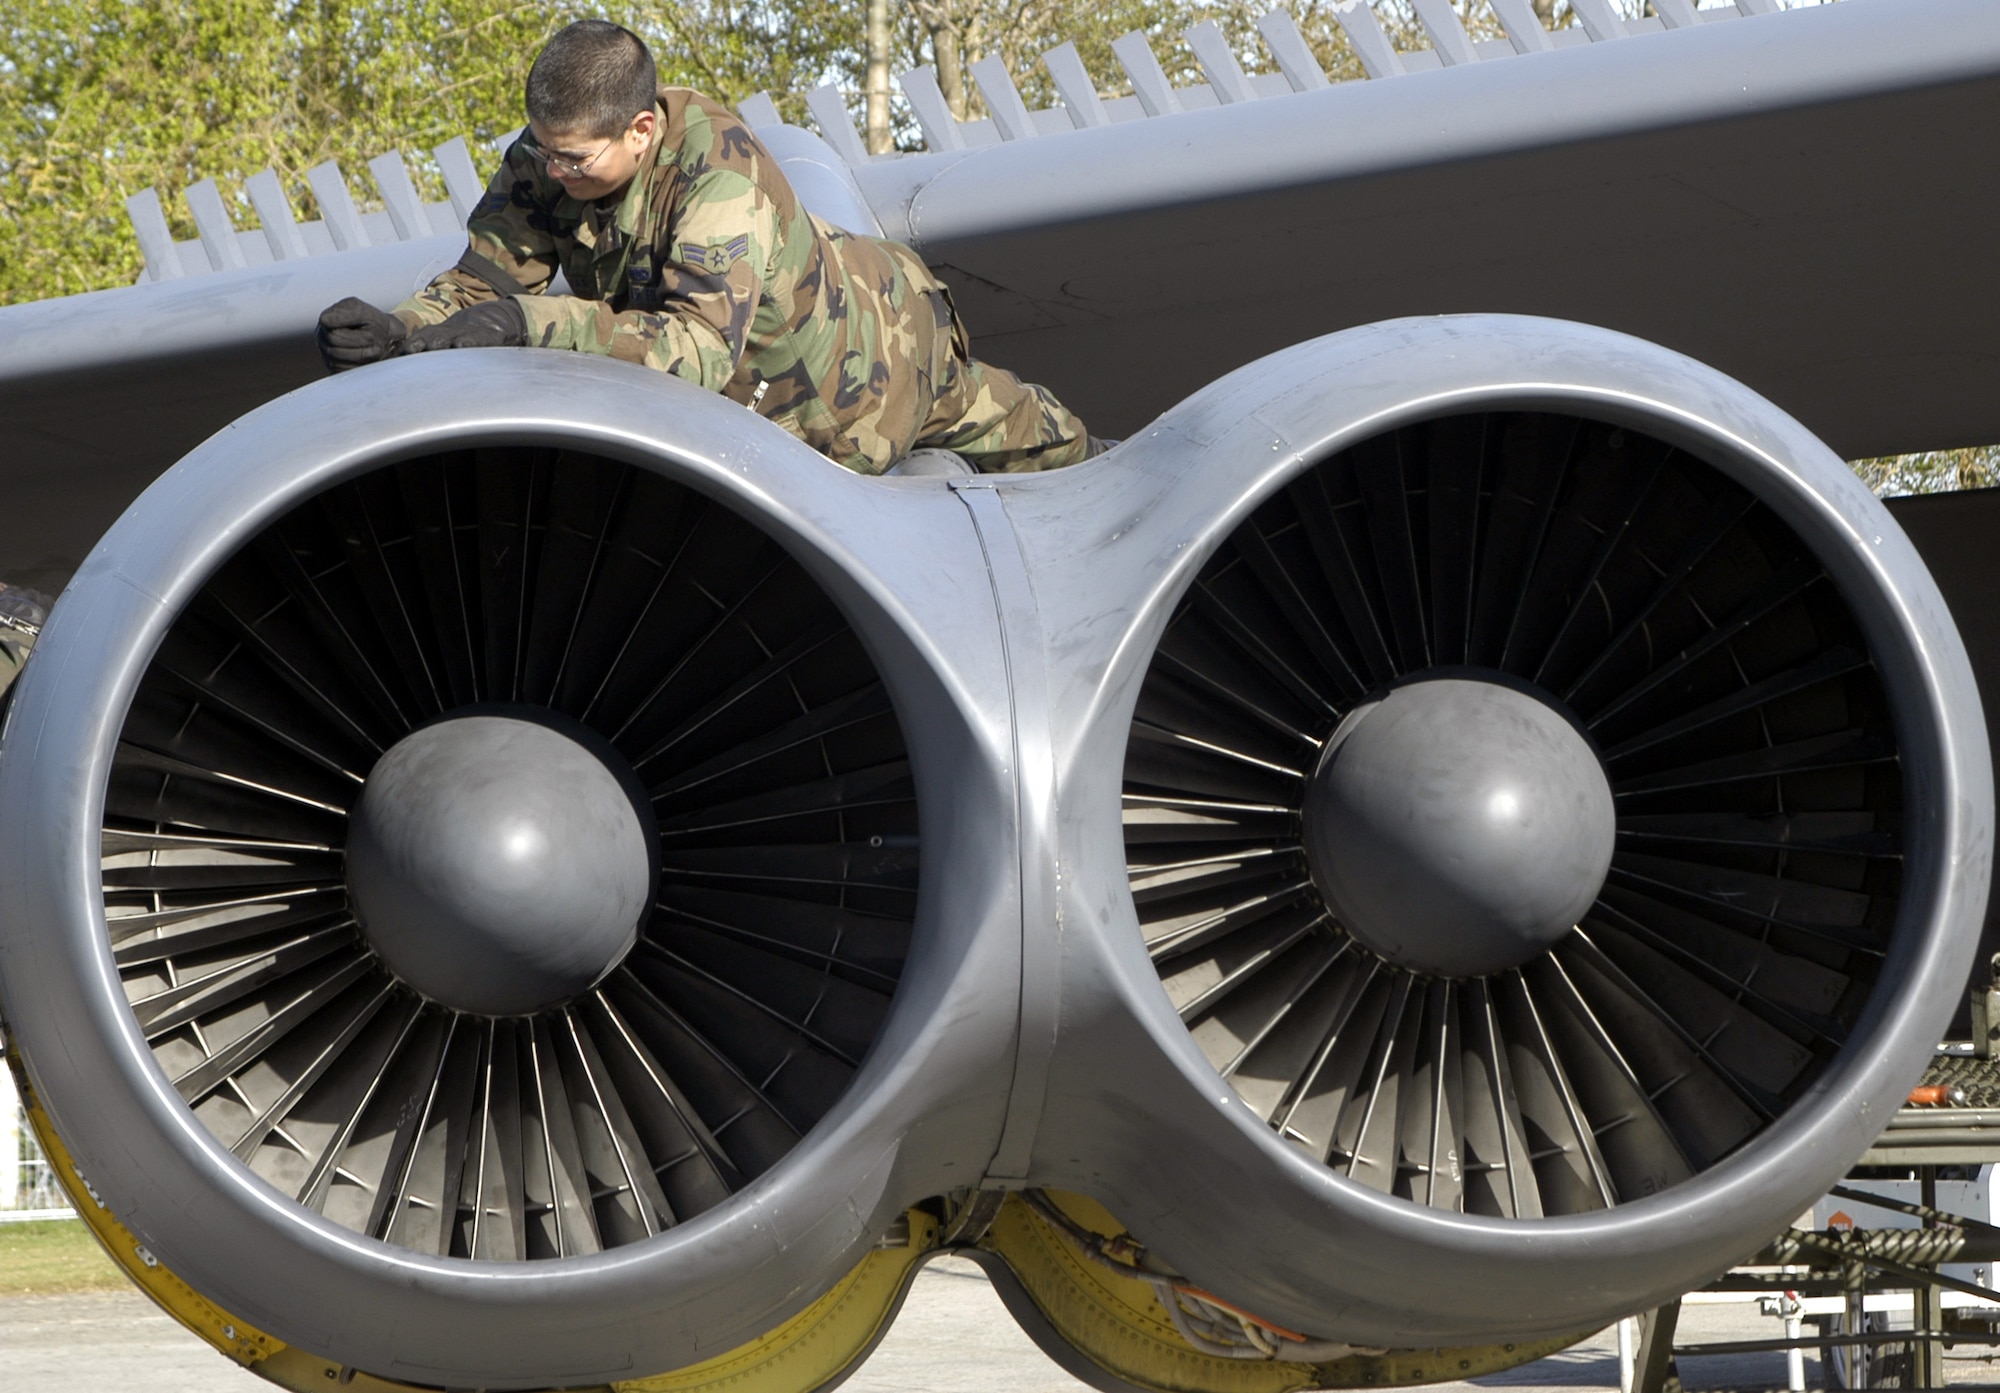 OPERATION IRAQI FREEDOM -- Airman 1st Class Efren Molinar twists a screw out of a B-52 Stratofortress engine cowling April 7 at a forward-deployed location.  Molinar was one of three crew chiefs disassembling the Buff to be washed that day, part of the start of a "contingency phase" maintenance operation that would last three days.  (U.S. Air Force photo by Tech. Sgt. Jason Tudor)